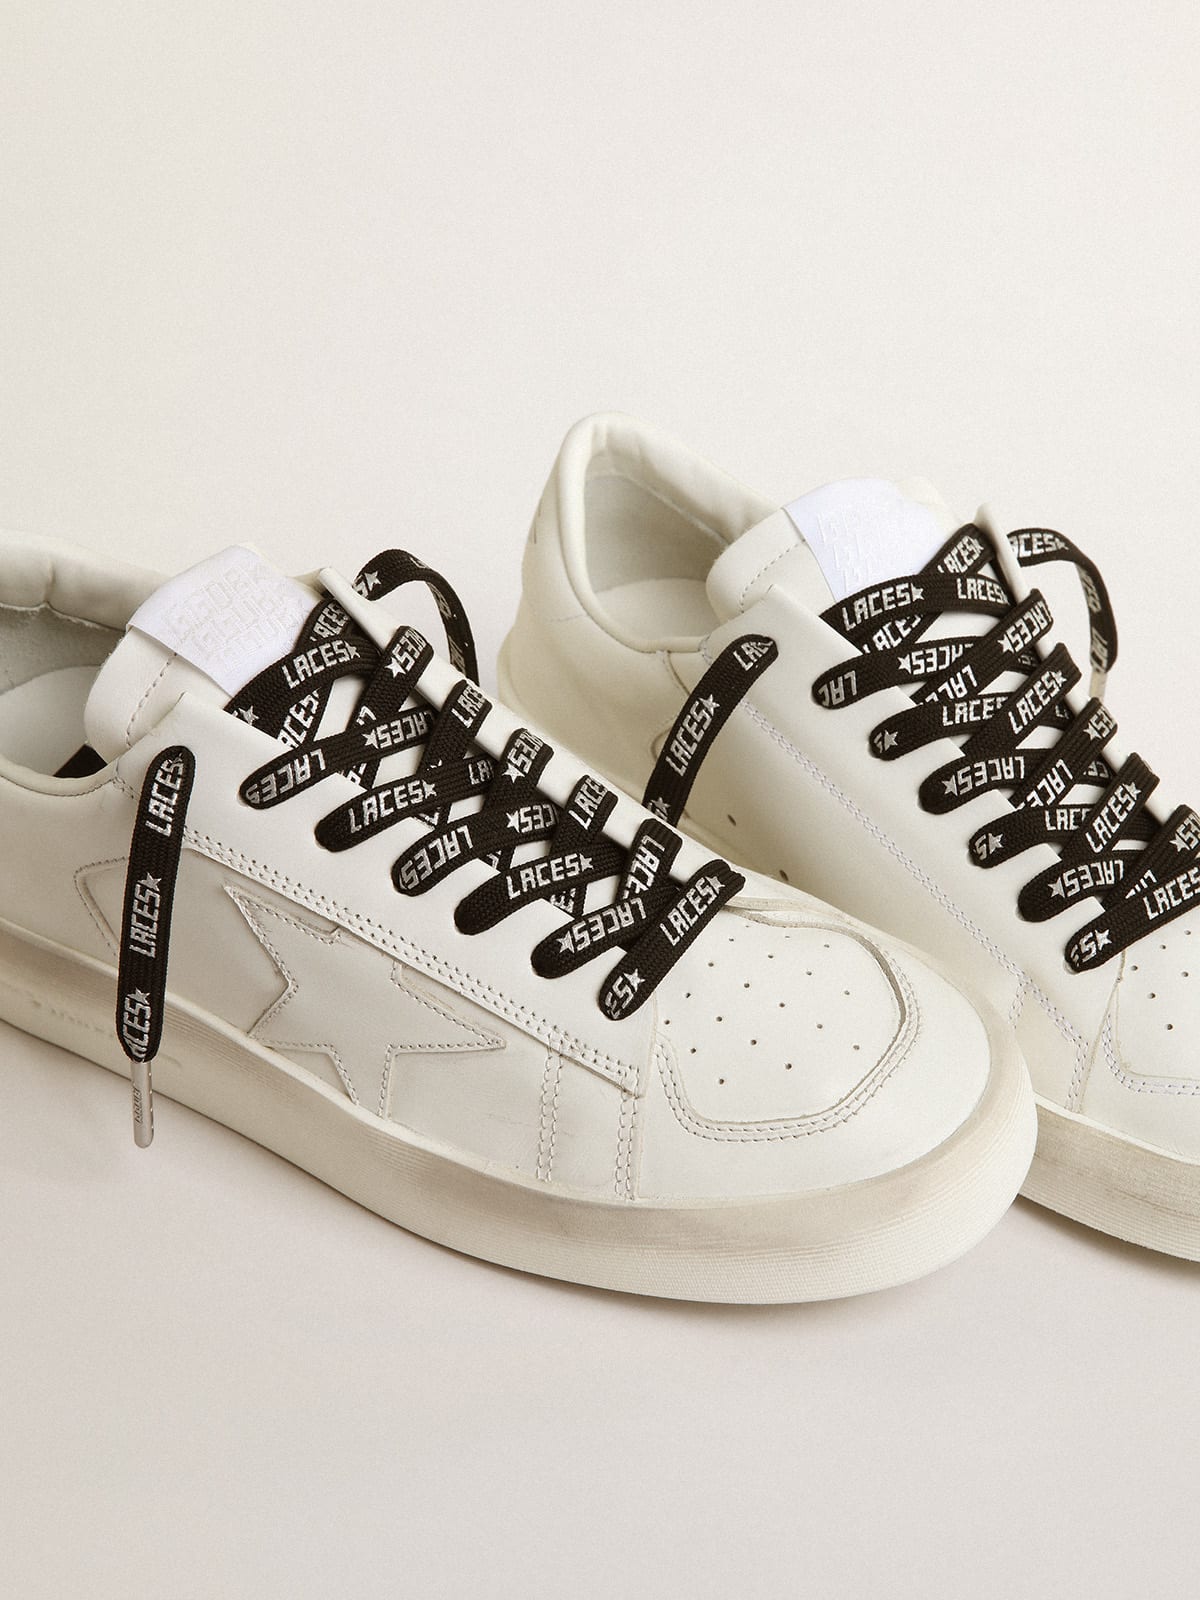 Golden Goose - Black laces with silver lettering in 